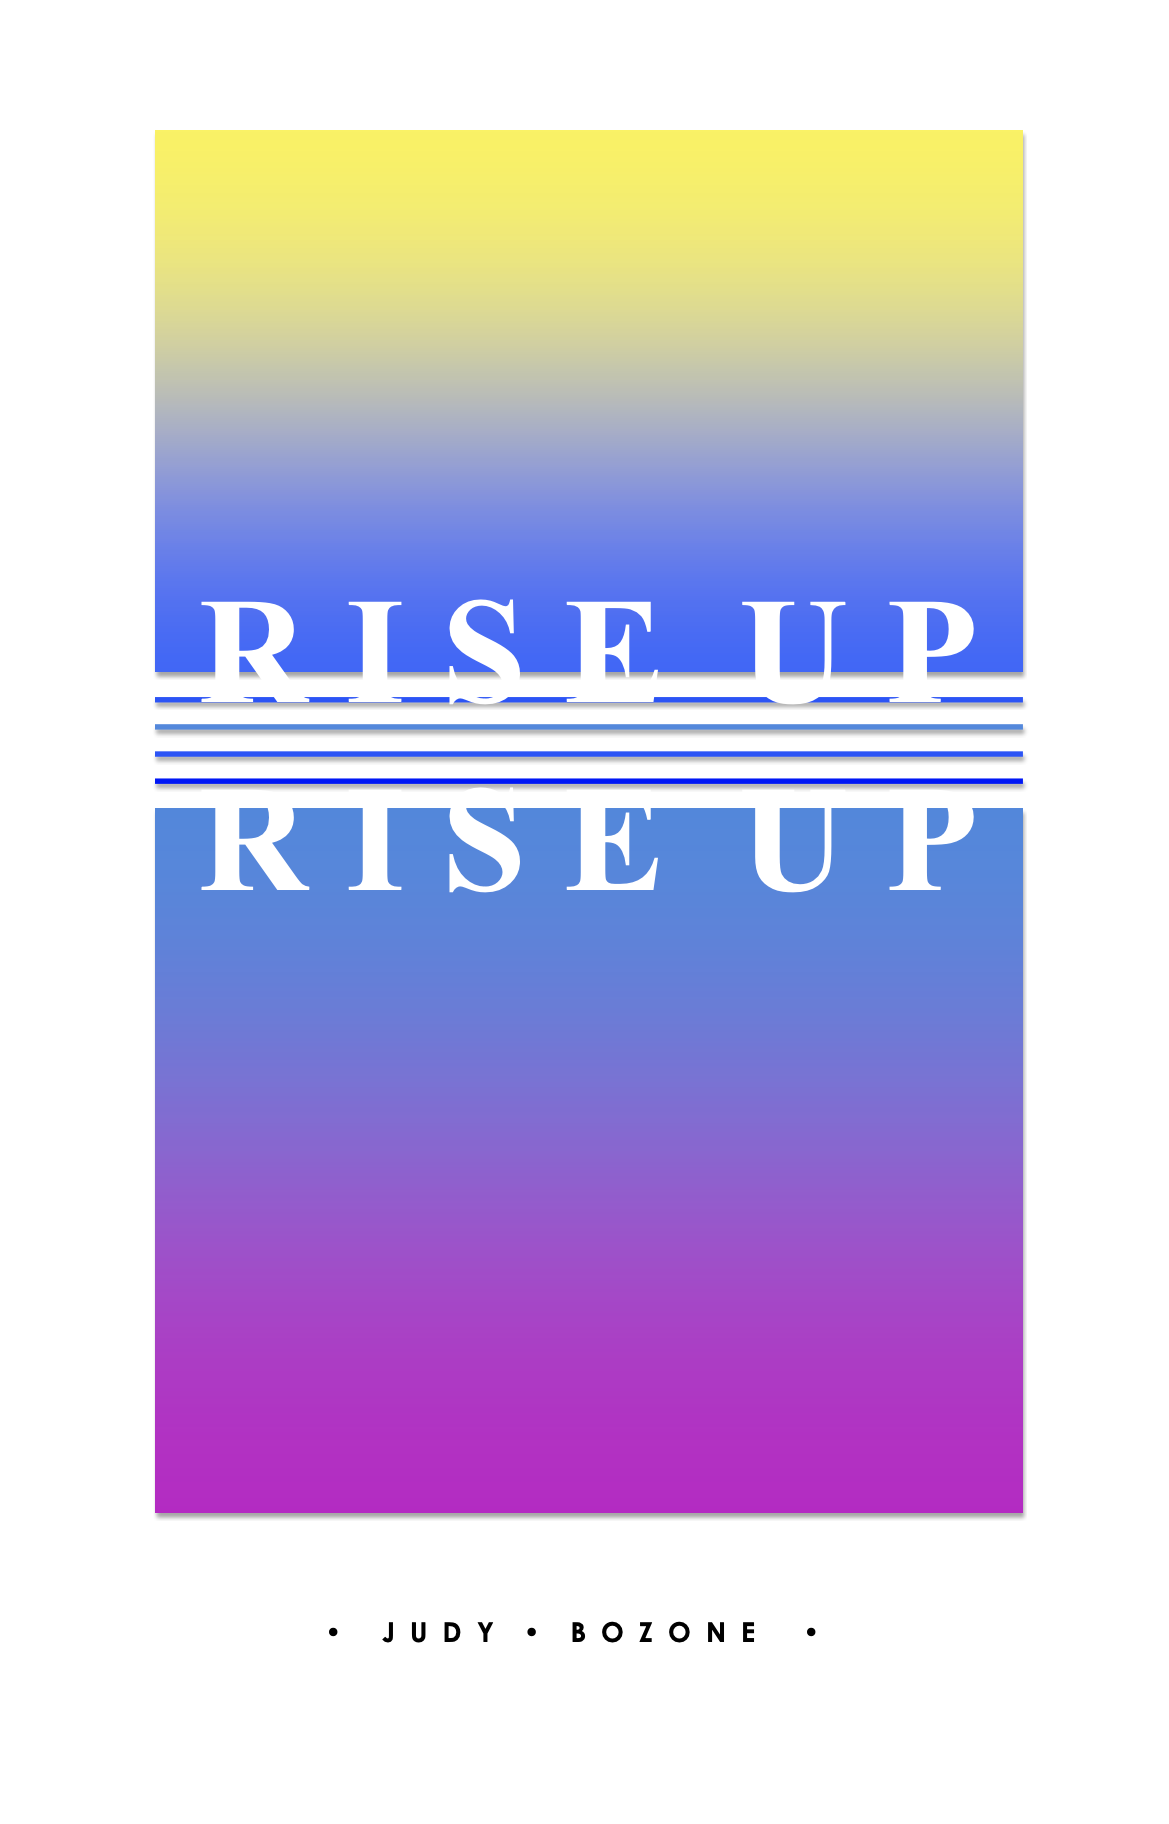 Rise Up (Score Only) by Judy Bozone